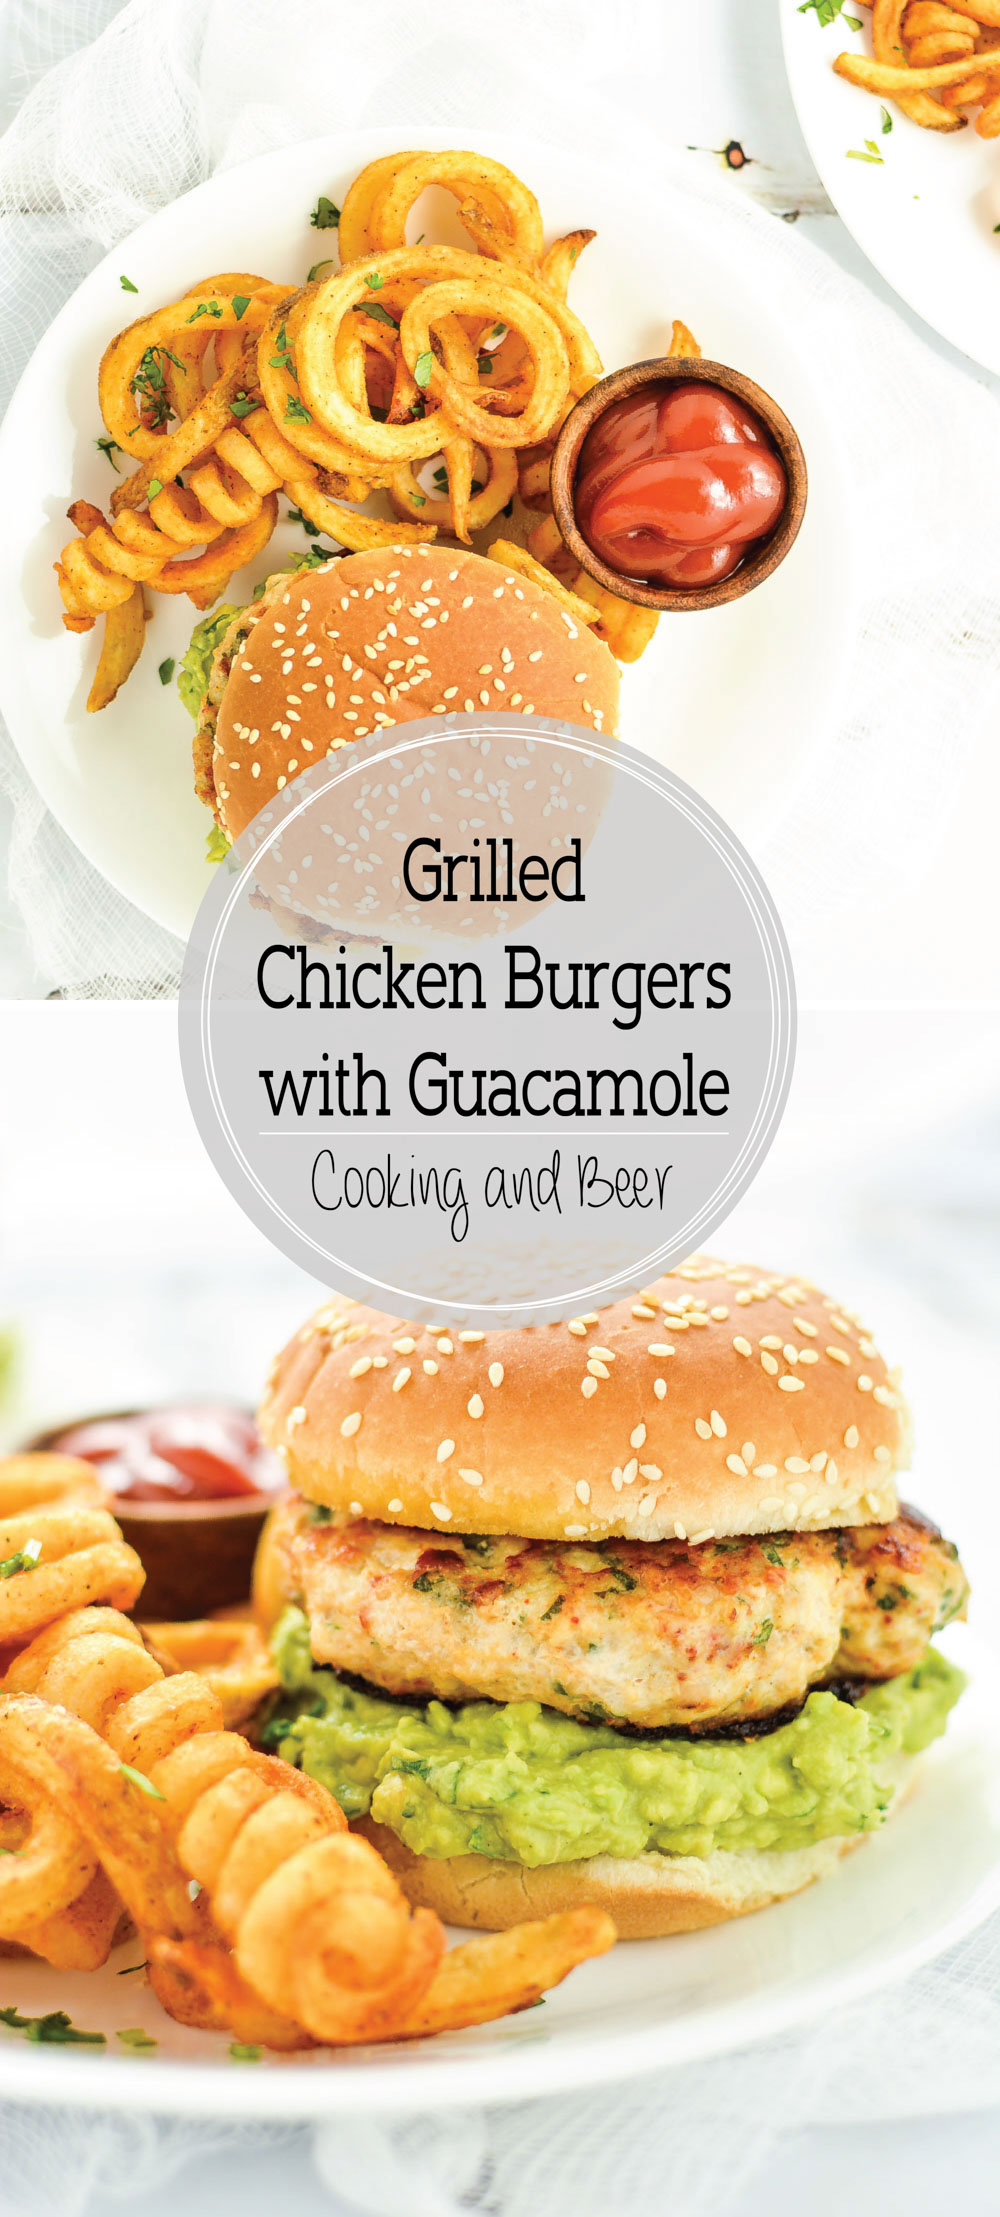 Grilled Chicken Burgers with Guacamole are a fun summer picnic recipe packed with bold flavors and a ton of texture!